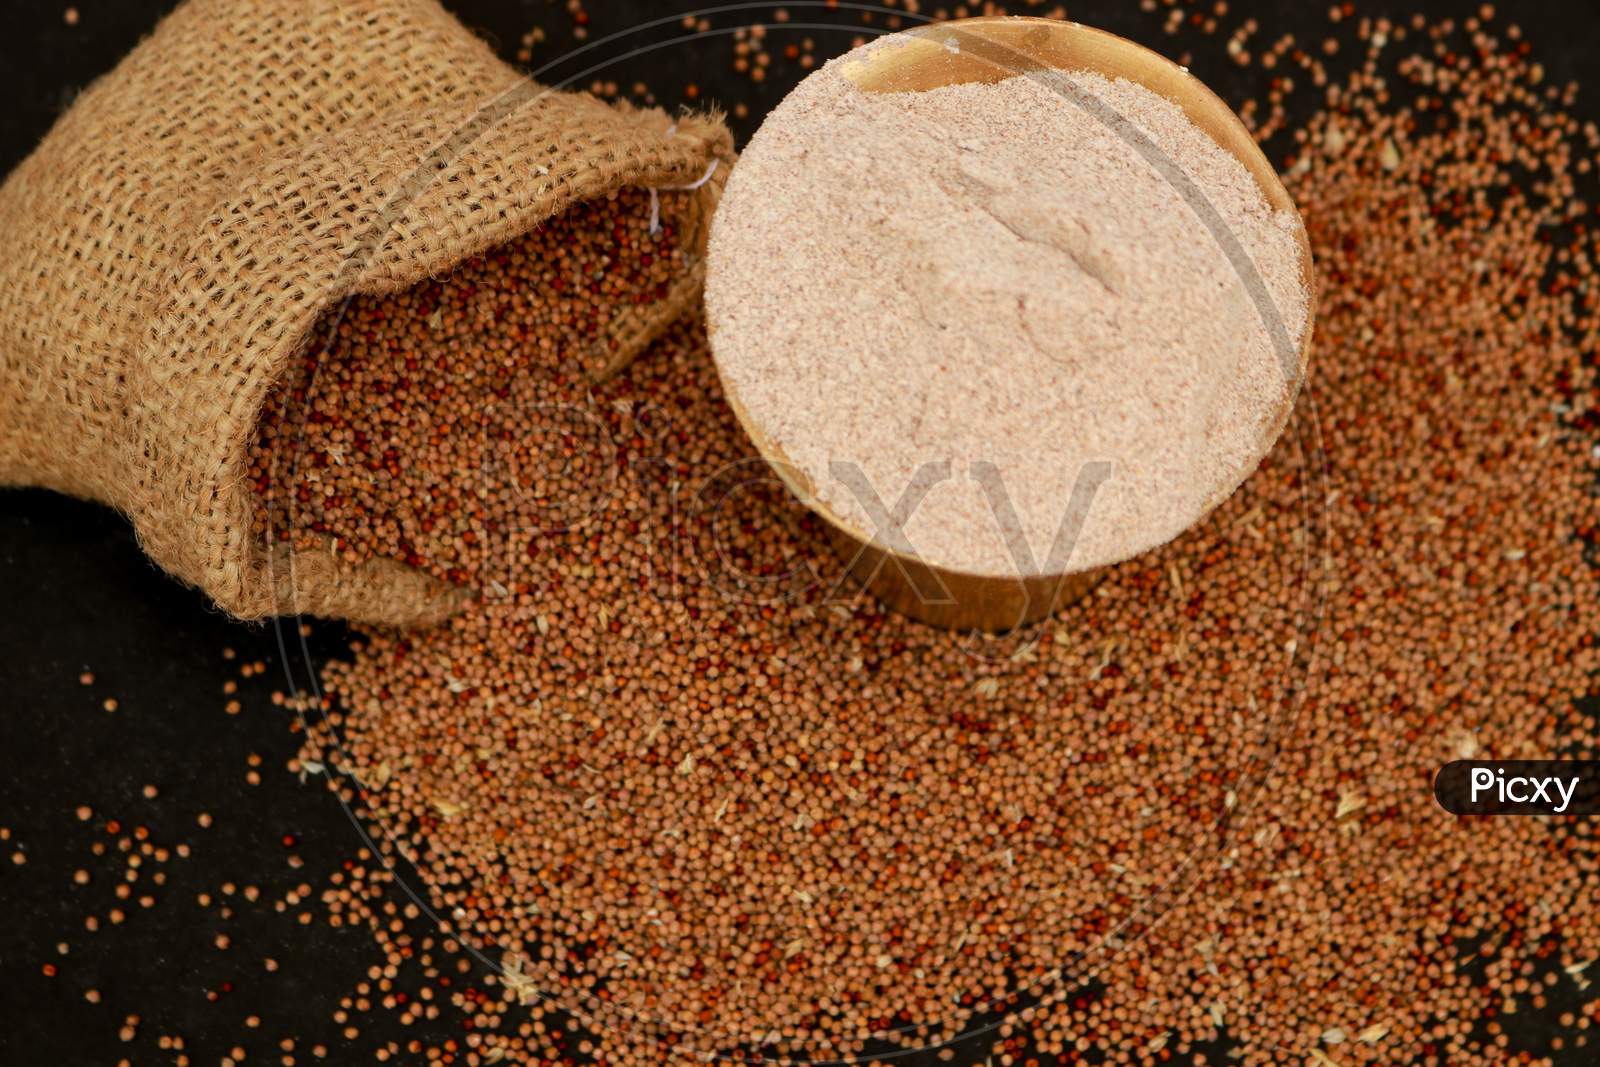 Indian Grains Ragi with Flour Cup and Burlap Bag Isolated On Black Background